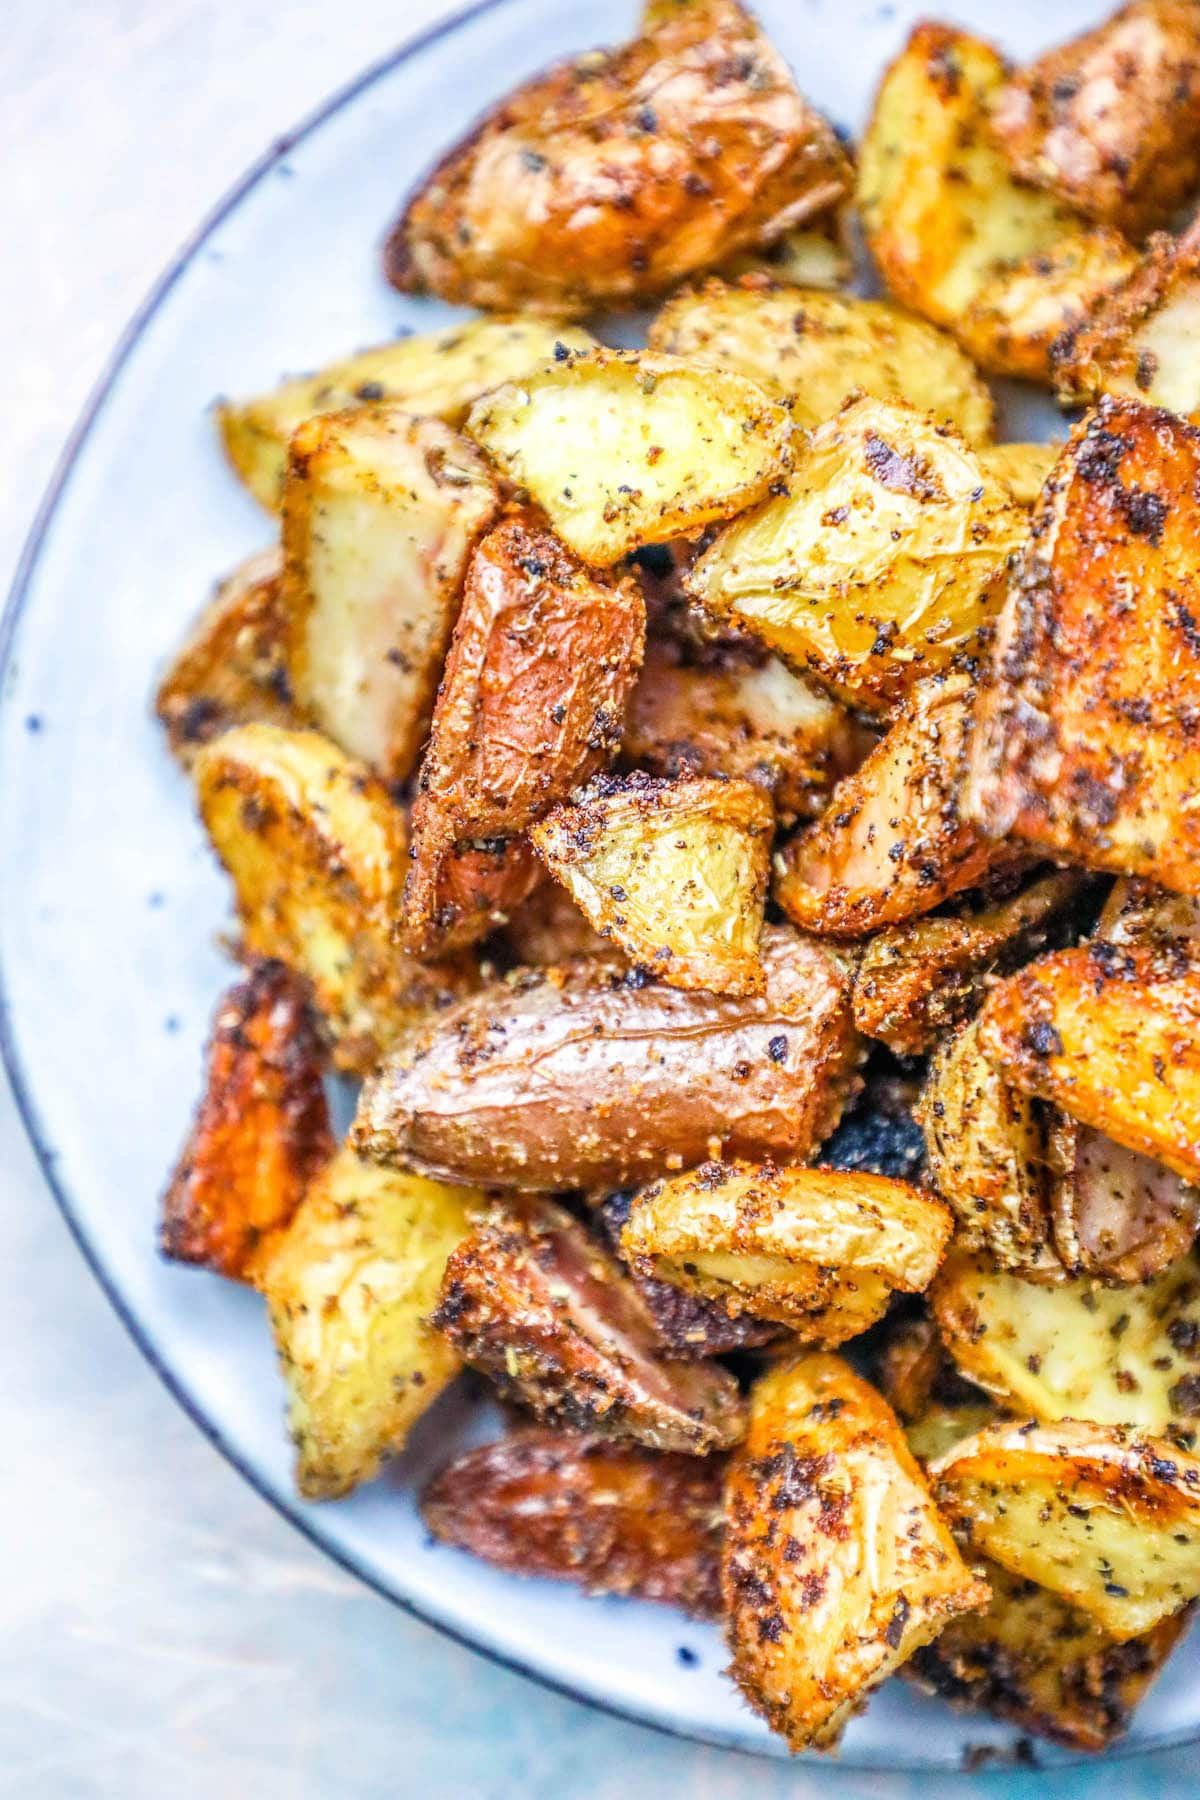 Potatoes Thanksgiving Side Dishes
 The Easiest Crispy Herbed Potato Wedges Thanksgiving Side Dish